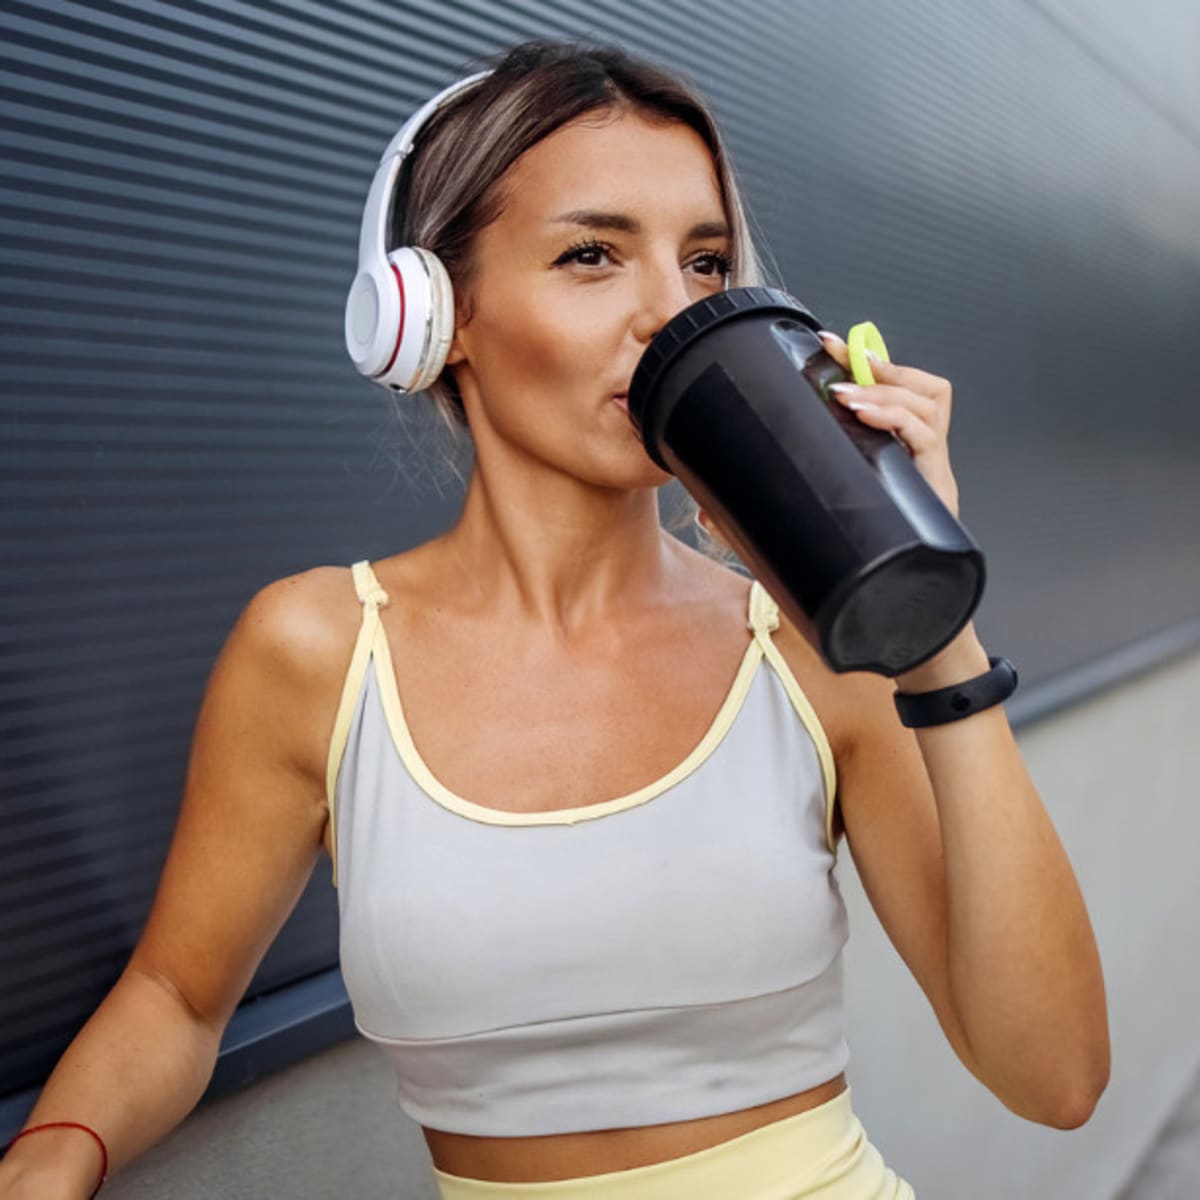 Can Shakeology Really Help You Lose Weight?